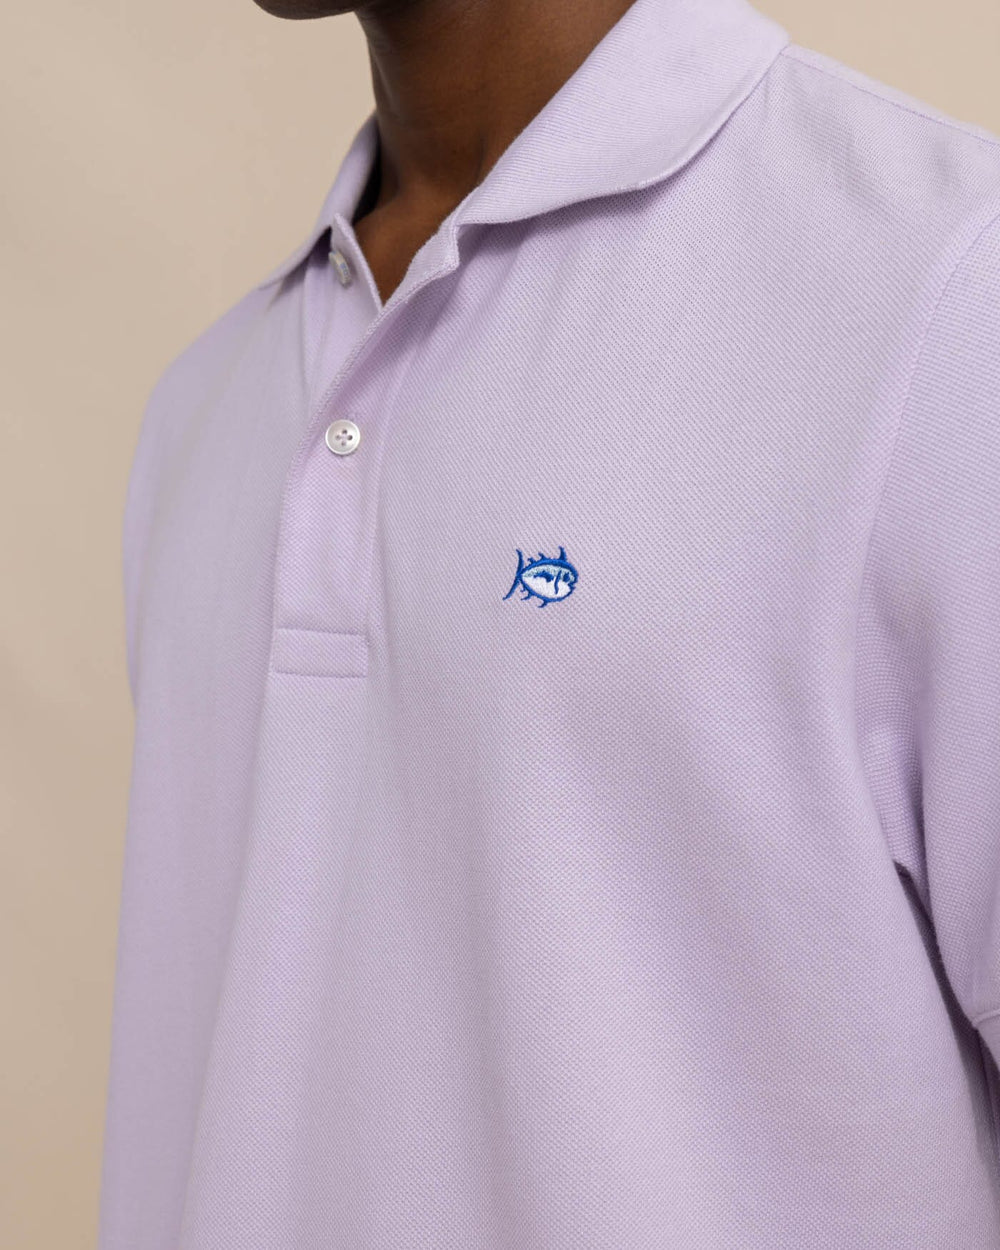 The detail view of the Southern Tide new-skipjack-polo-shirt by Southern Tide - Orchid Petal